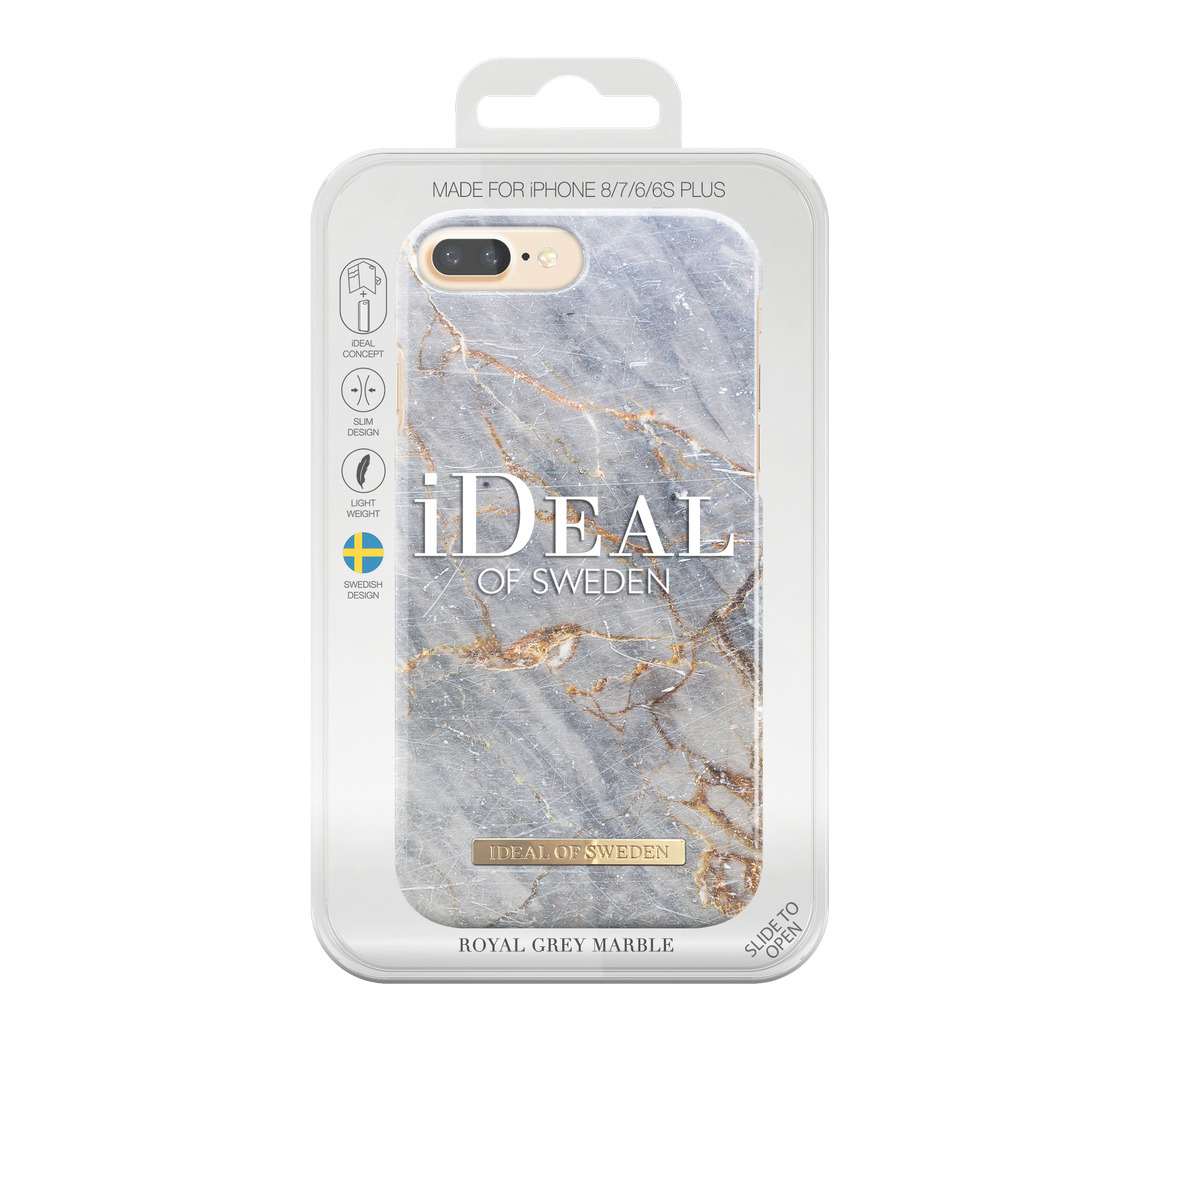 IDEAL OF SWEDEN Fashion, Backcover, Plus 7 Plus, ,iPhone iPhone Plus, iPhone Marble Grey Apple, 8 6